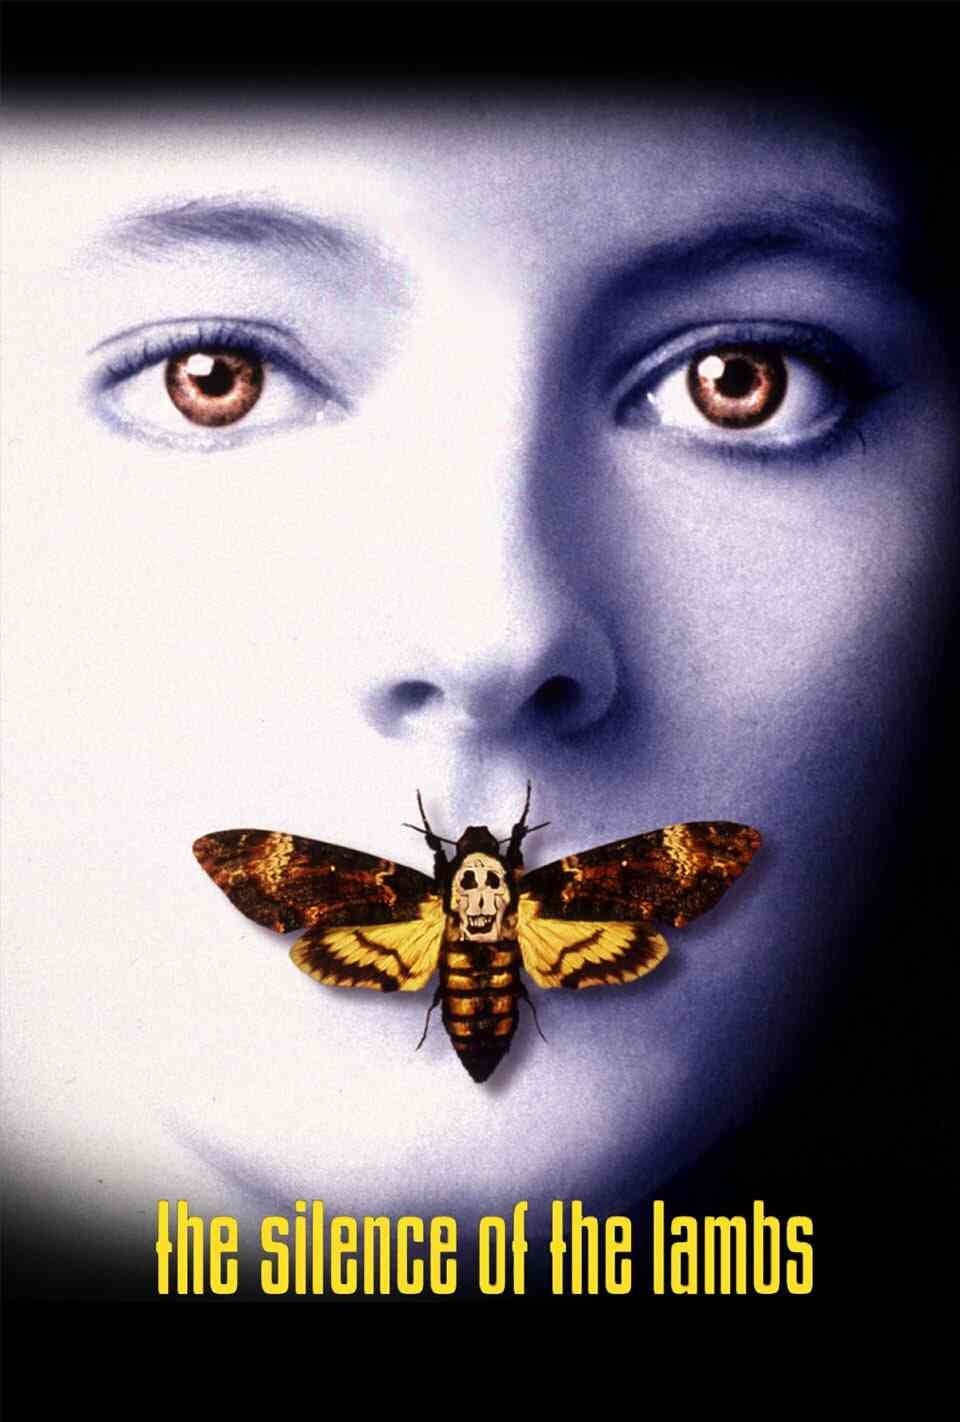 Read The Silence of the Lambs screenplay.